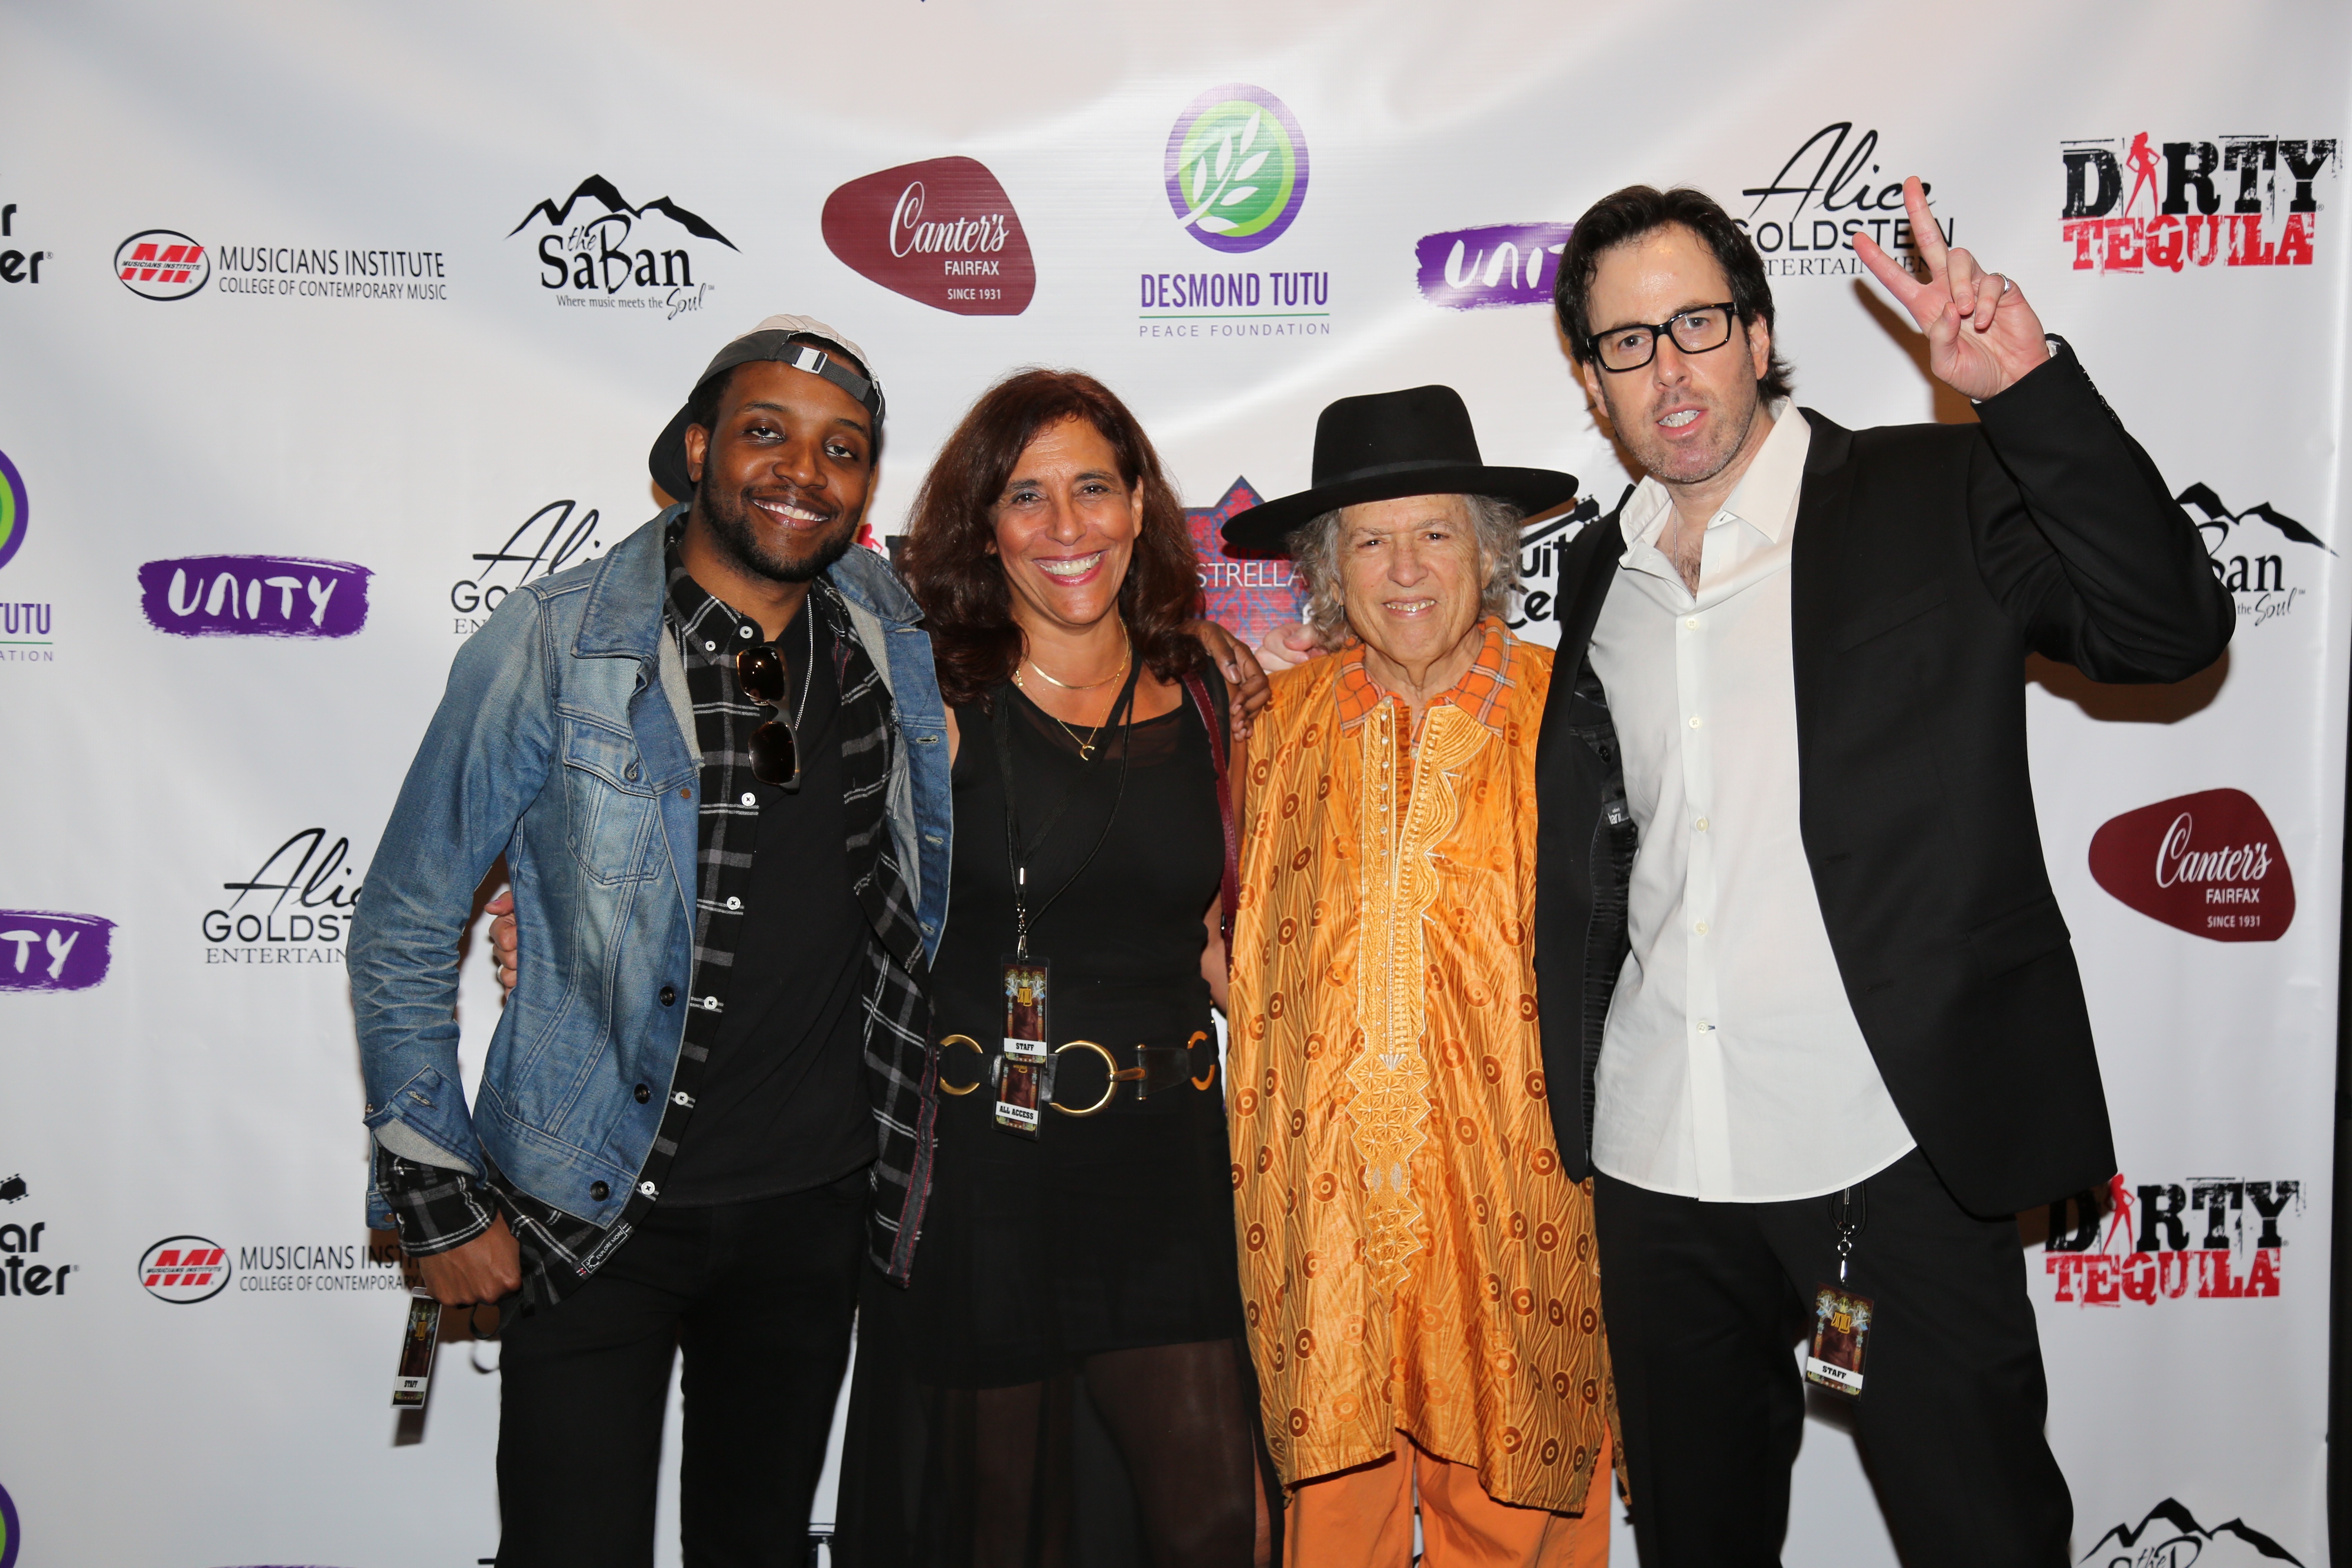  Biso Tutu-Gxashe, Lori Levin, poet Steve Kalinich and Adam Gaynor from Matchbox Twenty on the Red carpet. Photo courtesy the Experience Magazine 